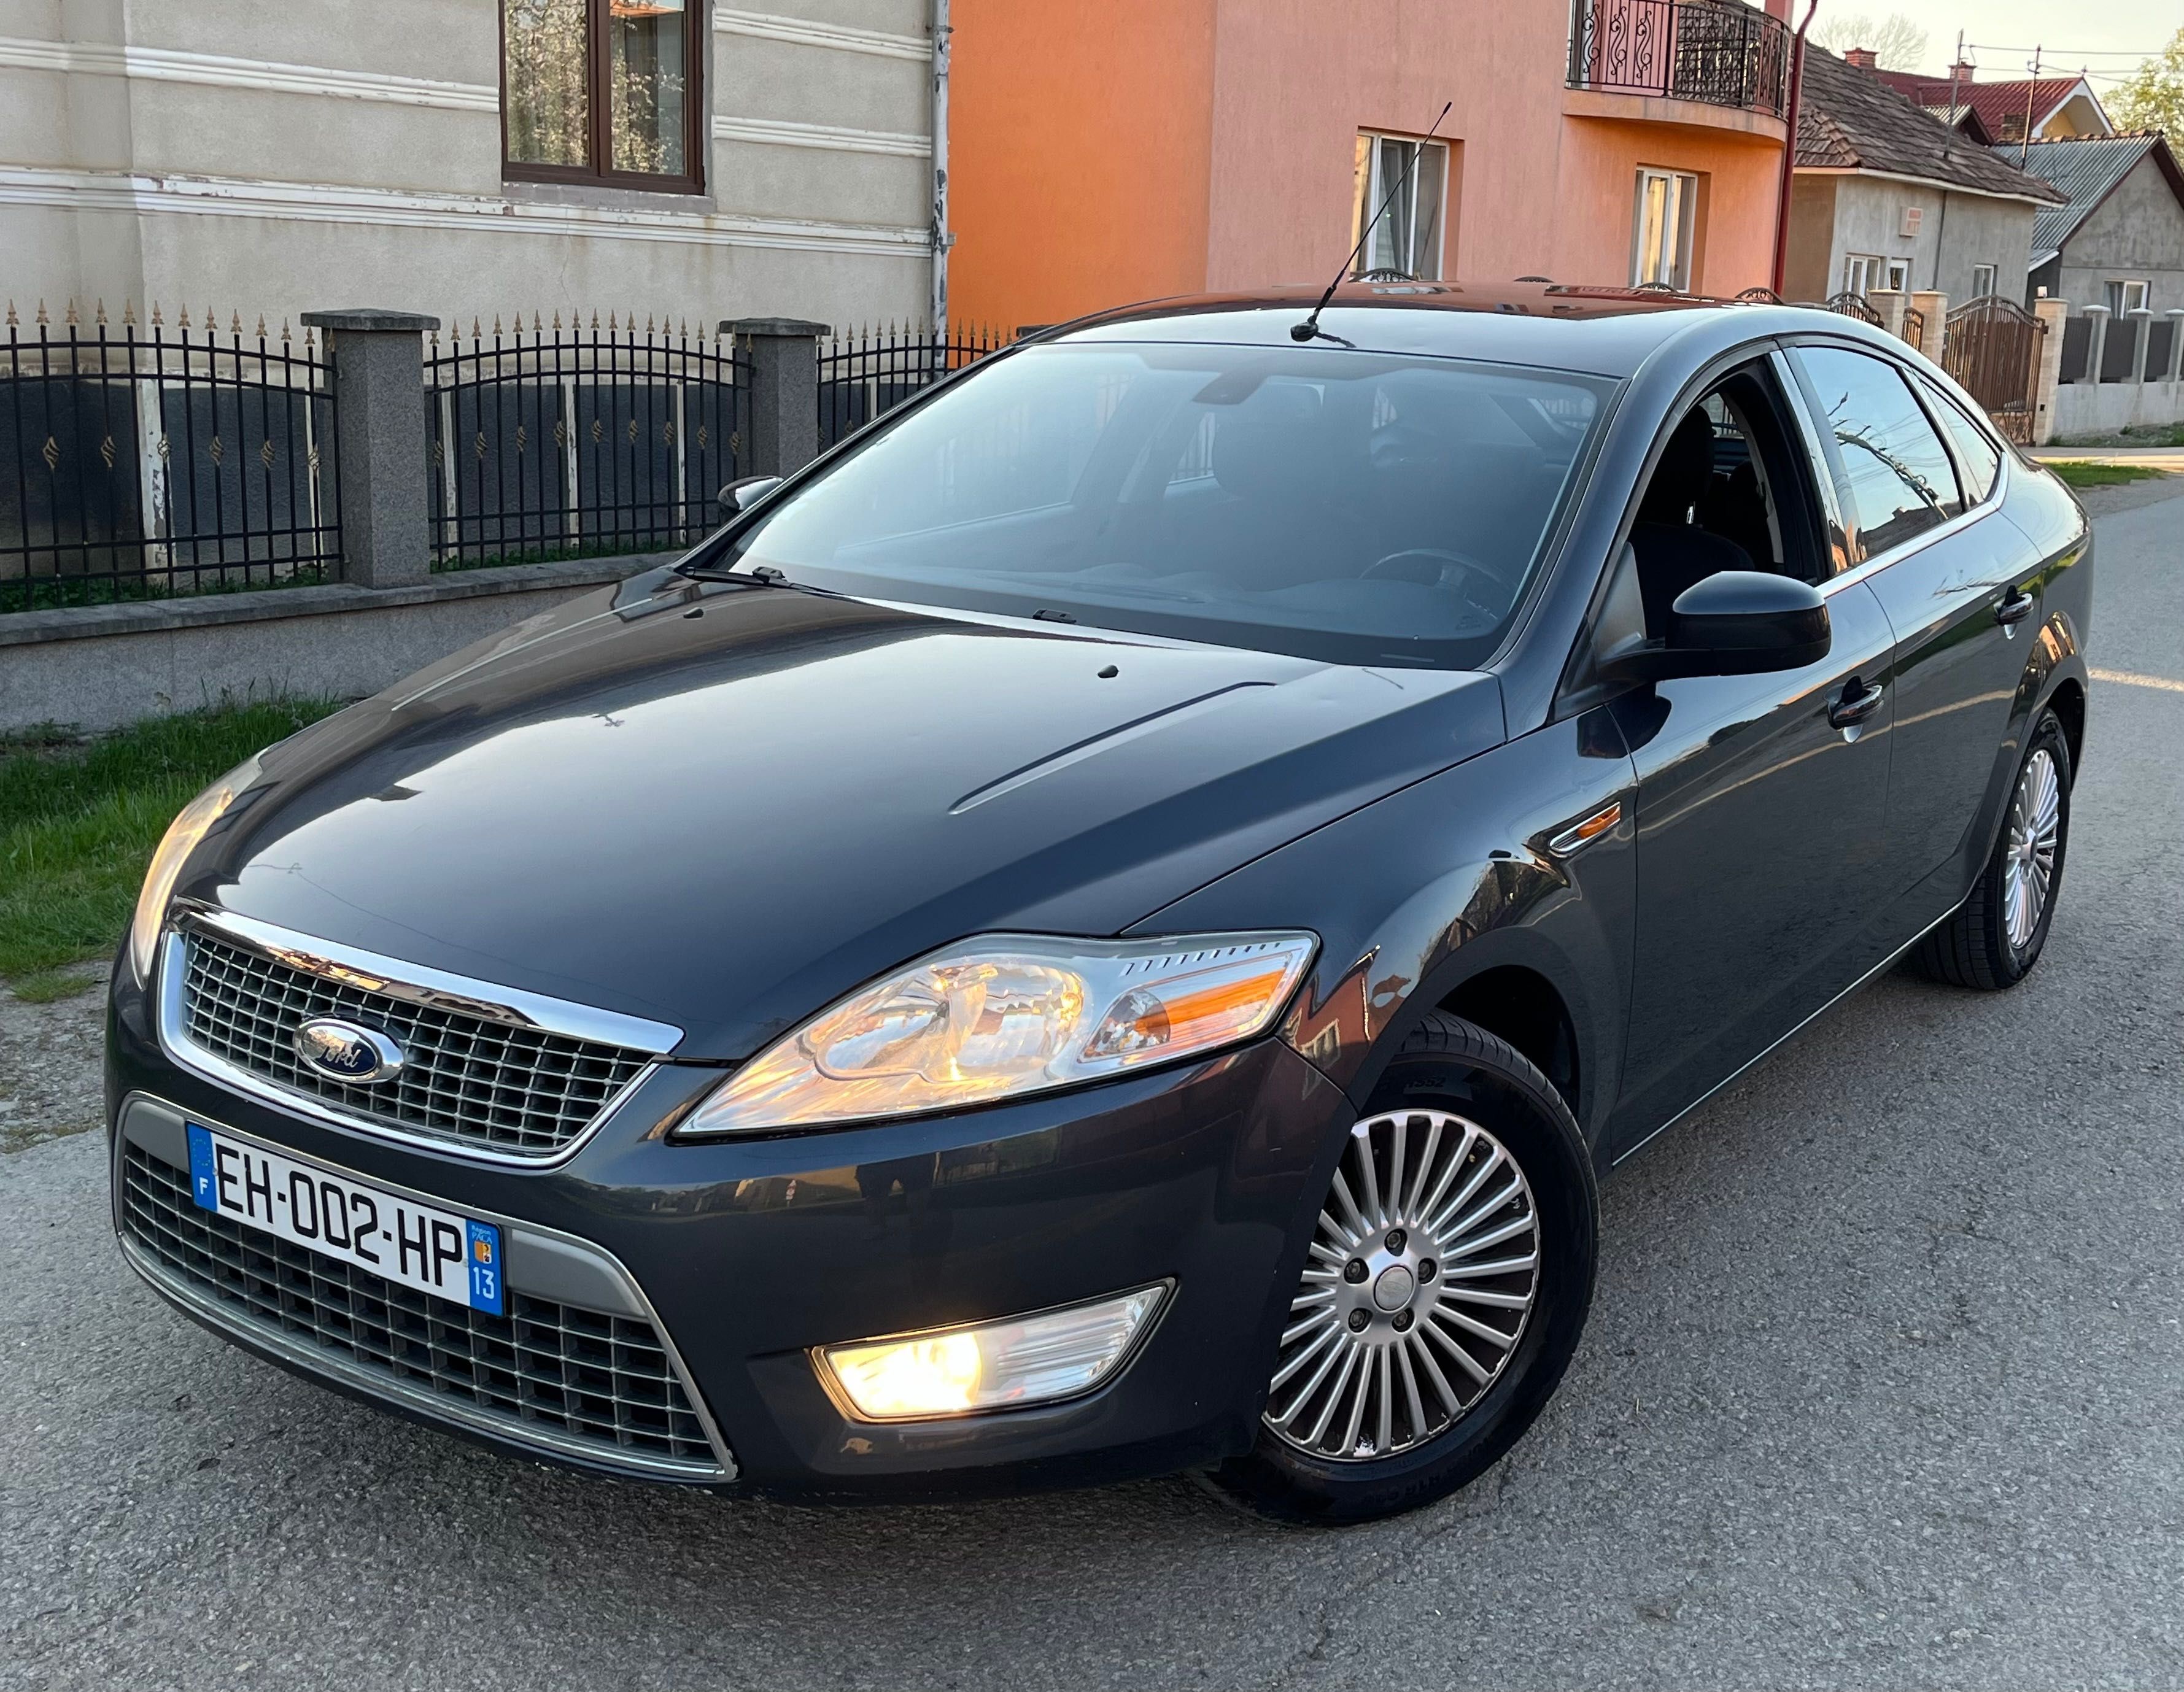 Ford Mondeo 2009 - Euro 4 Recent adus - Nr valabile 1.8 diesel